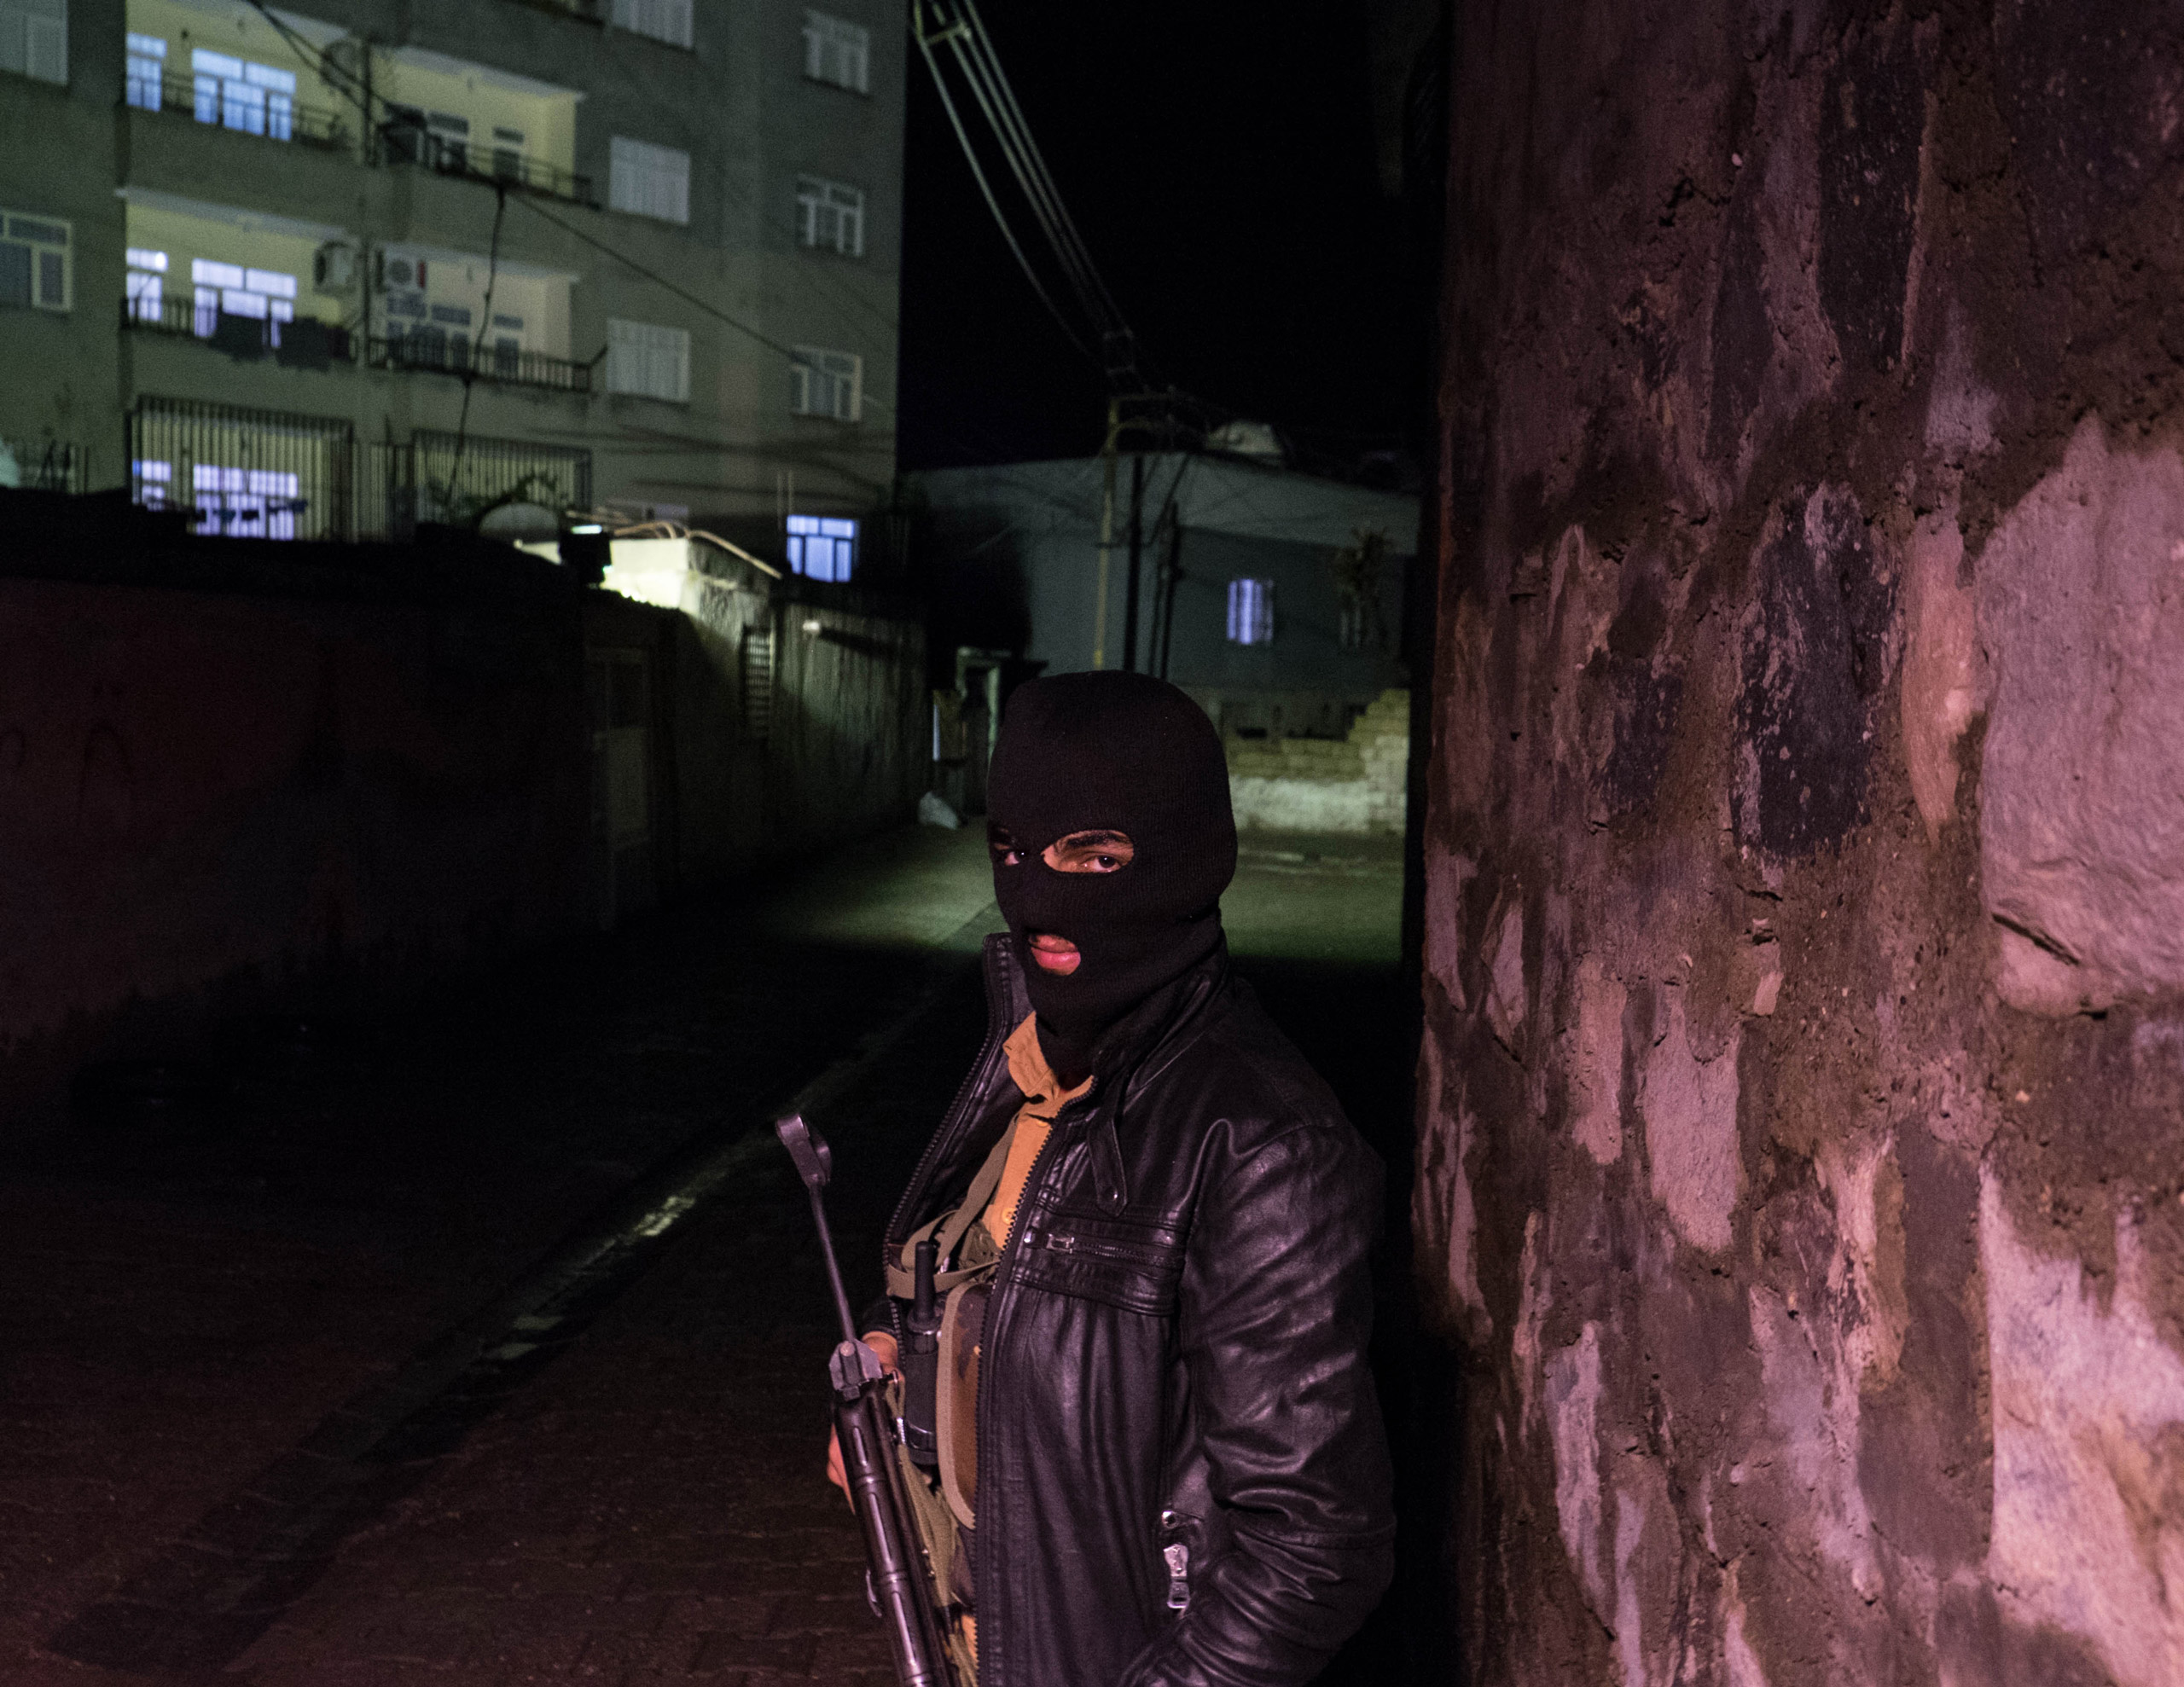 A seventeen-year-old member of the YDGH (Patriotic Revolutionary Youth Movement) at a check point in Yefes, an autonomous neighborhood of Cizre, Turkey, on Oct. 28, 2015. Since July, several neighborhoods declared autonomy and groups of young Kurds have taken up arms and raised barricades to prevent the advances of the Turkish forces. In August, the Turkish authorities imposed a nine-day curfew during which 21 people died.